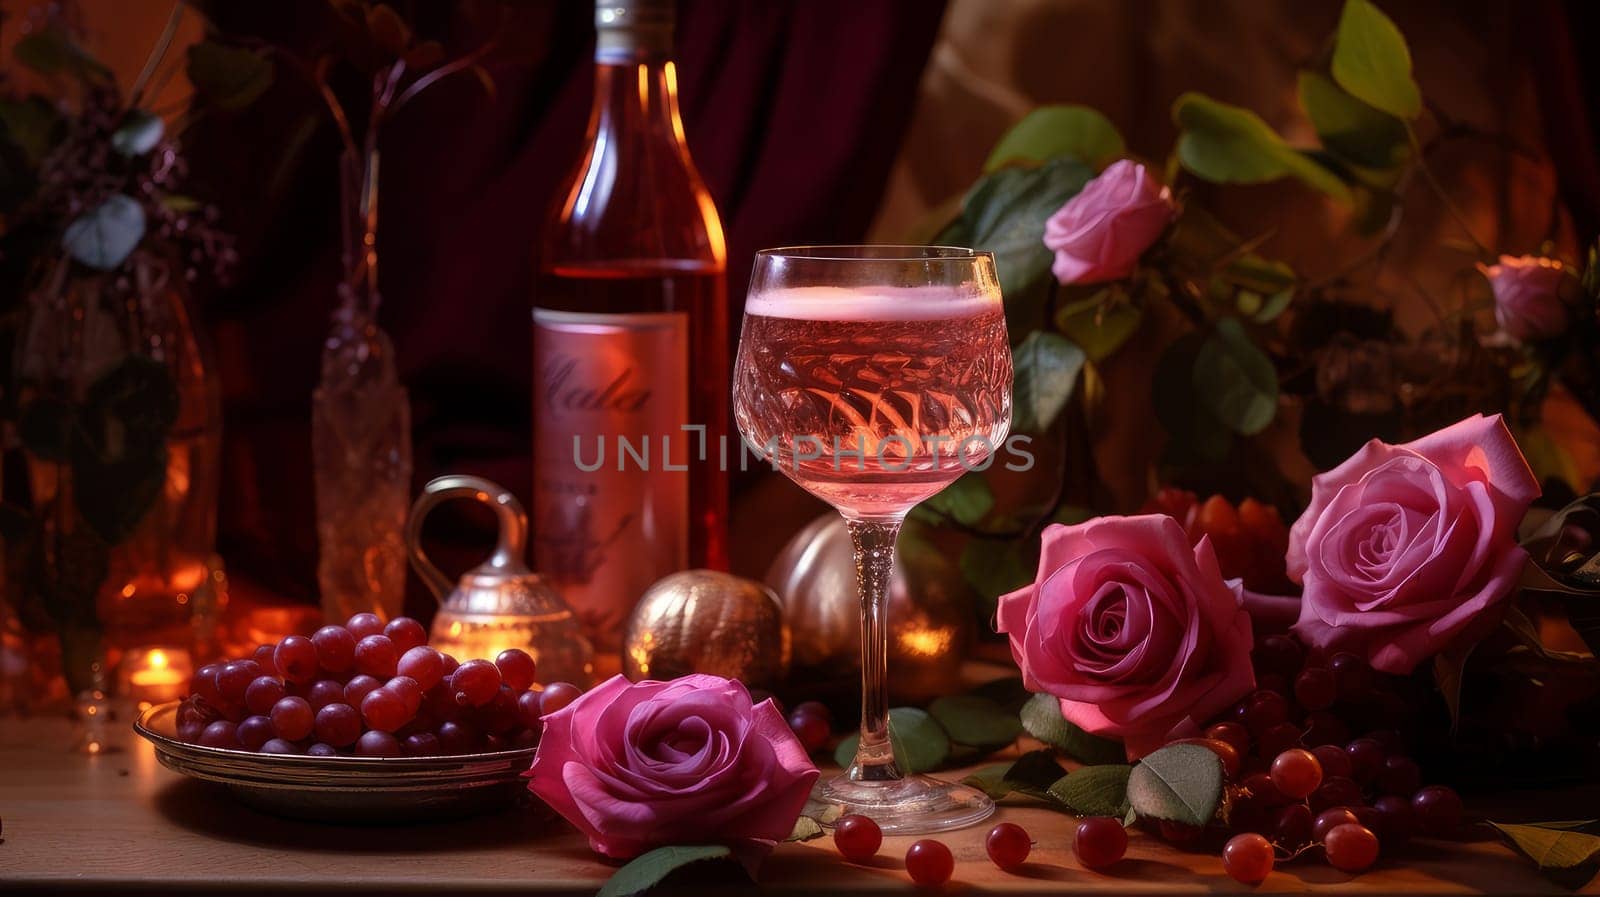 Exquisite still life with rose wine, cheese and grapes on a wicker tray on a wooden table on a dark background. by Alla_Yurtayeva